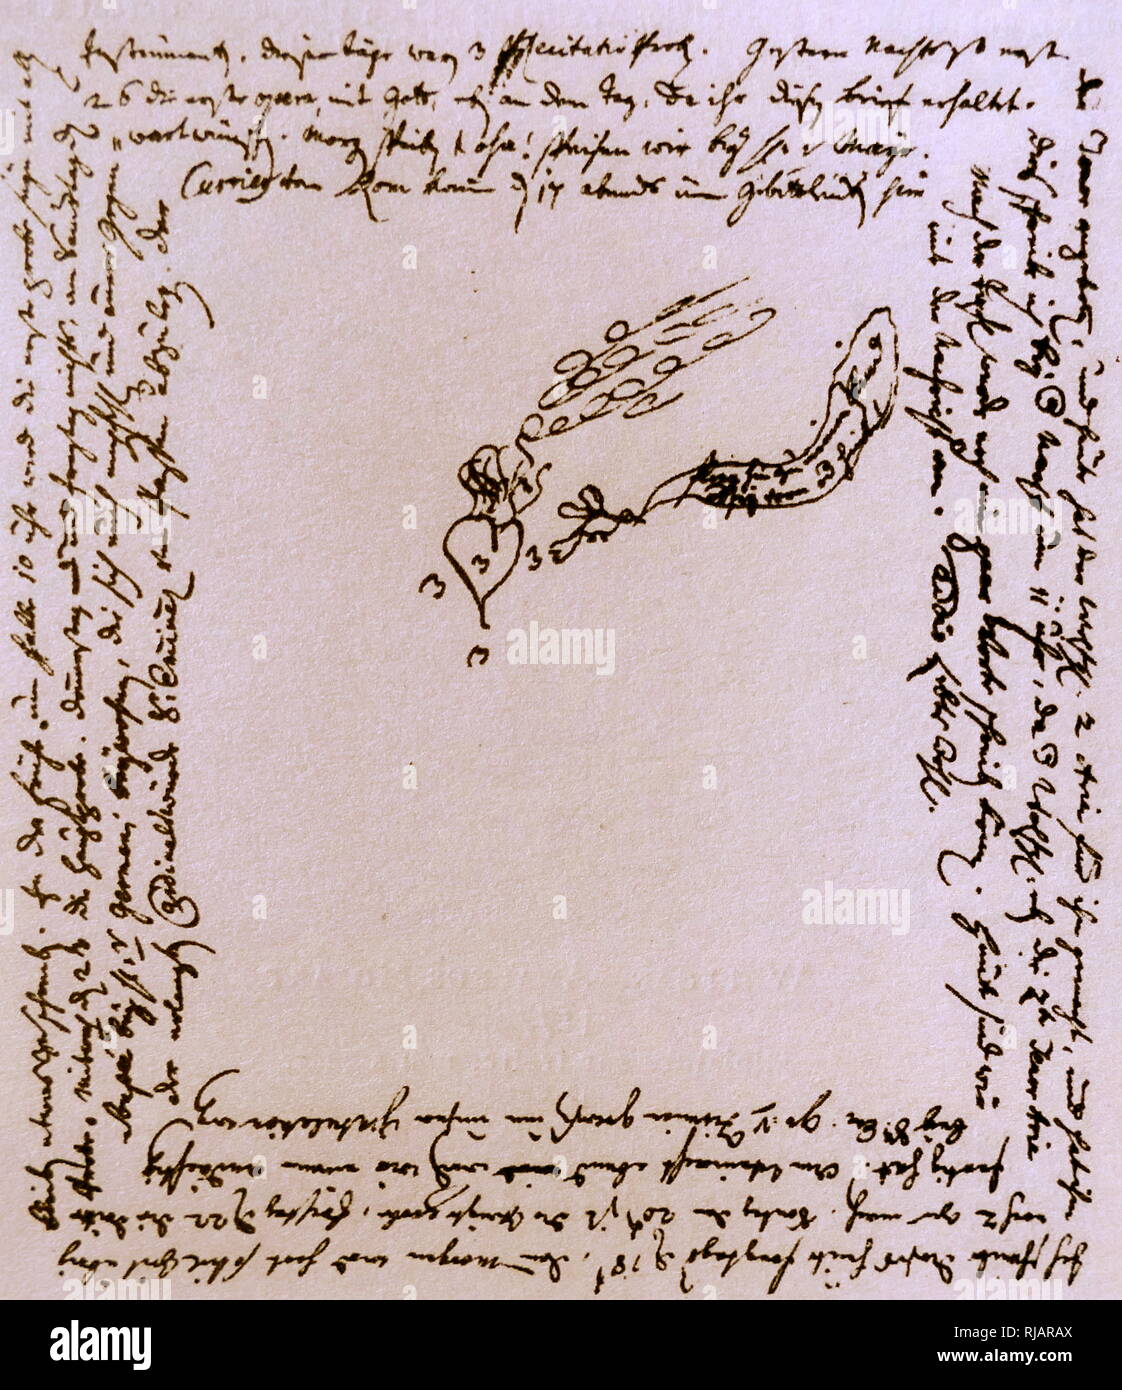 Letter written by Mozart to his sister Marianne during his tour of Italy, days after the completion of his Opera, Lucio Silla in 1772, at the Teatro Regio Ducal in Milan  Wolfgang Amadeus Mozart (1756 – 1791), was a prolific and influential composer of the Classical era. Stock Photo